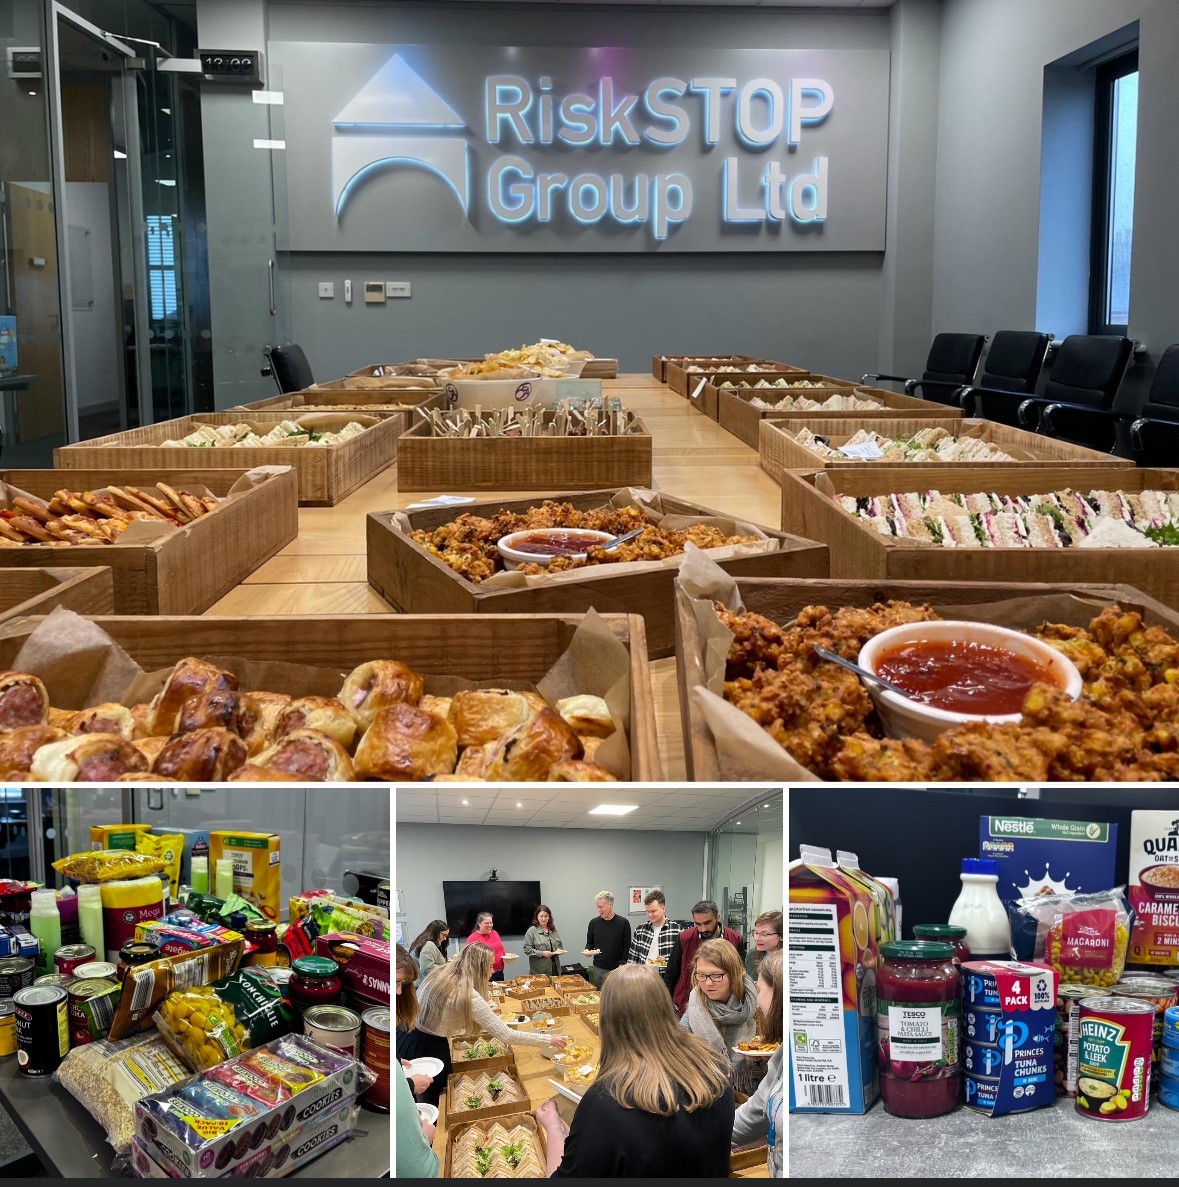 Today, we had the pleasure of treating our employees to a lunch buffet from Manna Kitchen. In the spirit of giving back, we encouraged donations to our local food bank in exchange. A heartfelt thank you to all of our amazing employees your kindness makes a real difference.